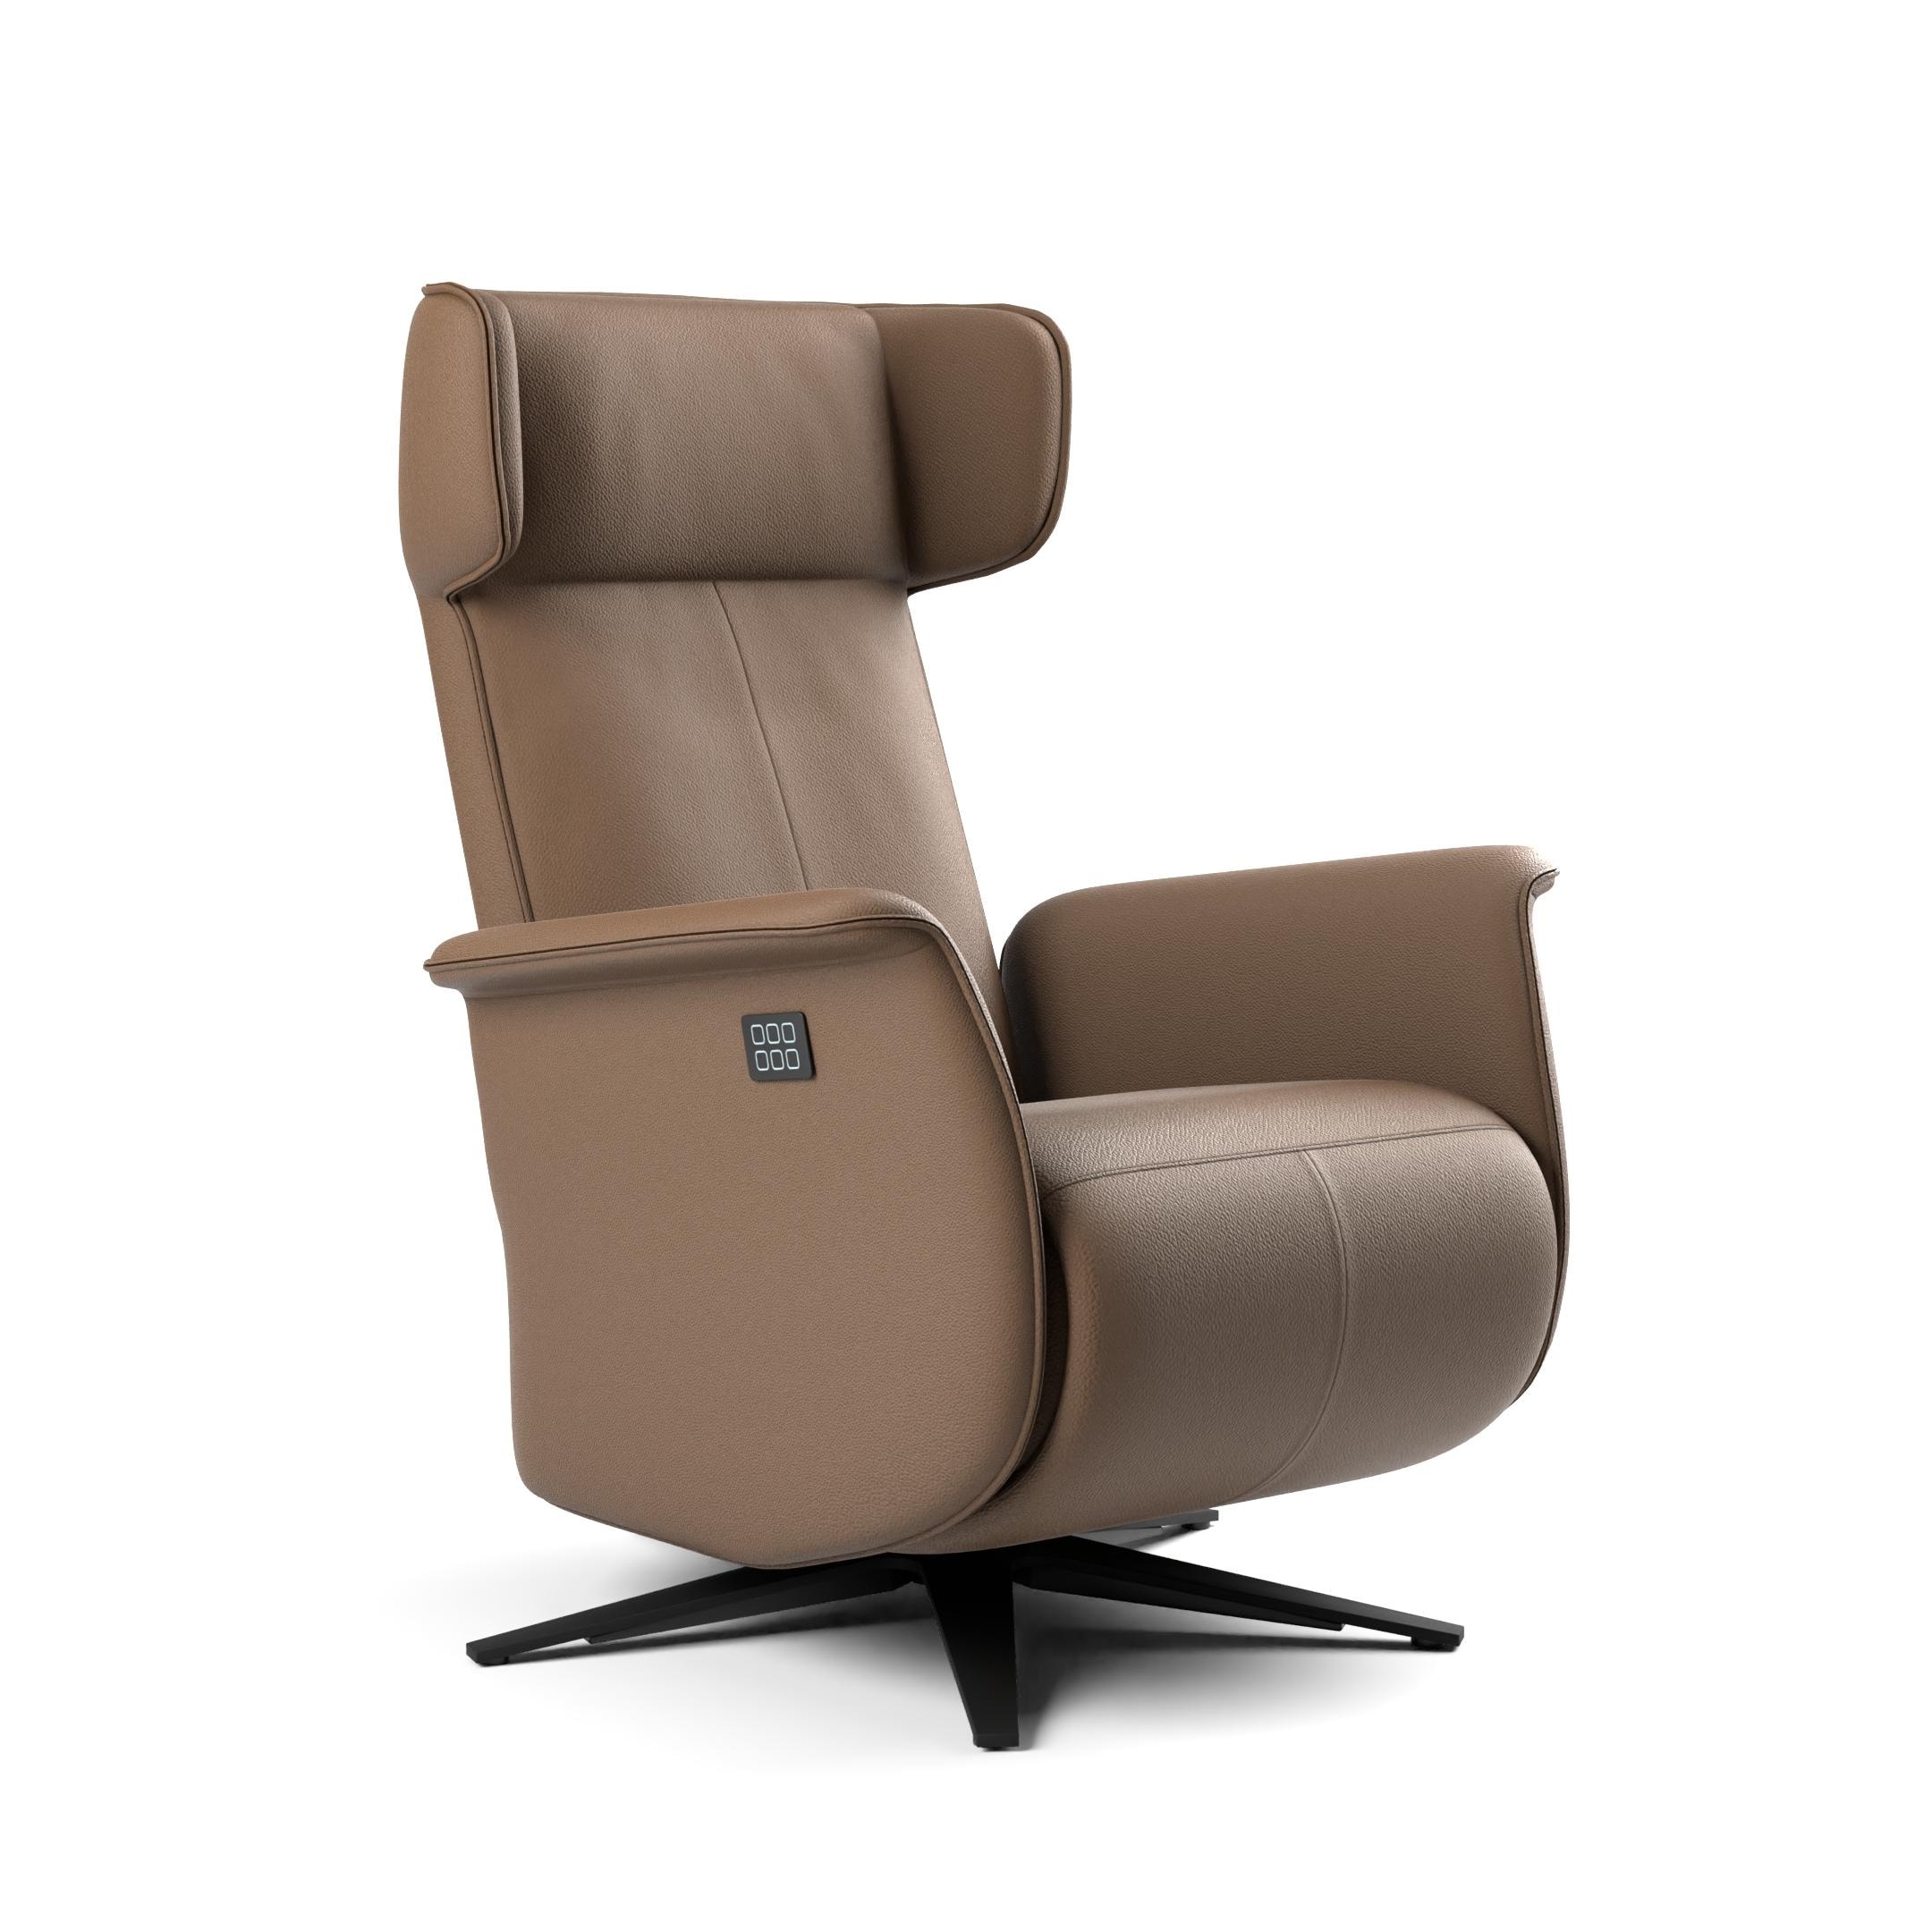 https://ak1.ostkcdn.com/images/products/is/images/direct/3ca11eaacc422688097f46d29ad9bd5a1d277175/CavilUSA-Rashbi-Home-Recliner-Fully-Adjustable-Battery-Operated.jpg